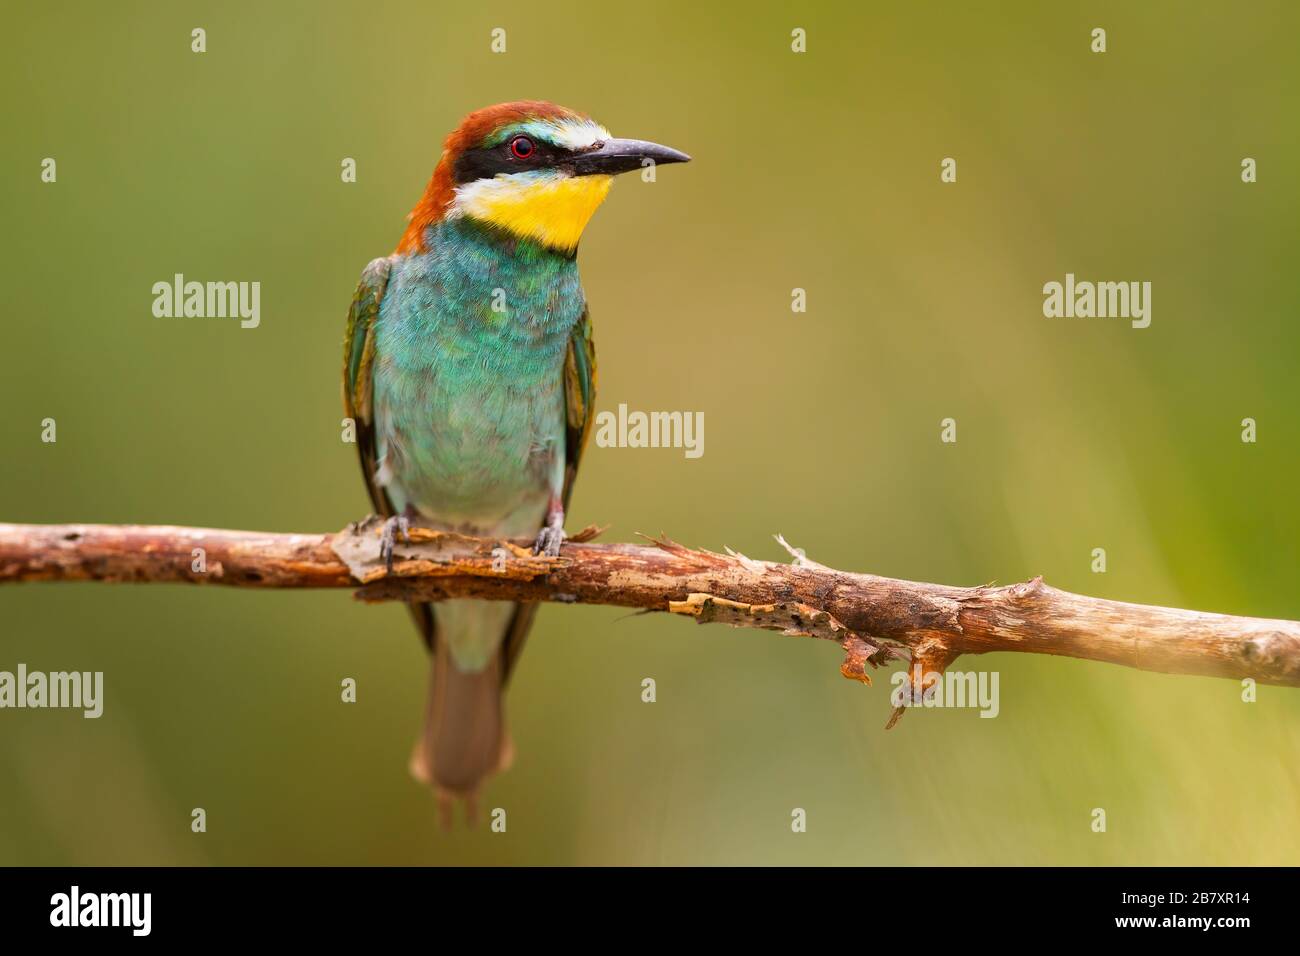 Surprised european bee-eater sitting in summertime from front view with copy space Stock Photo